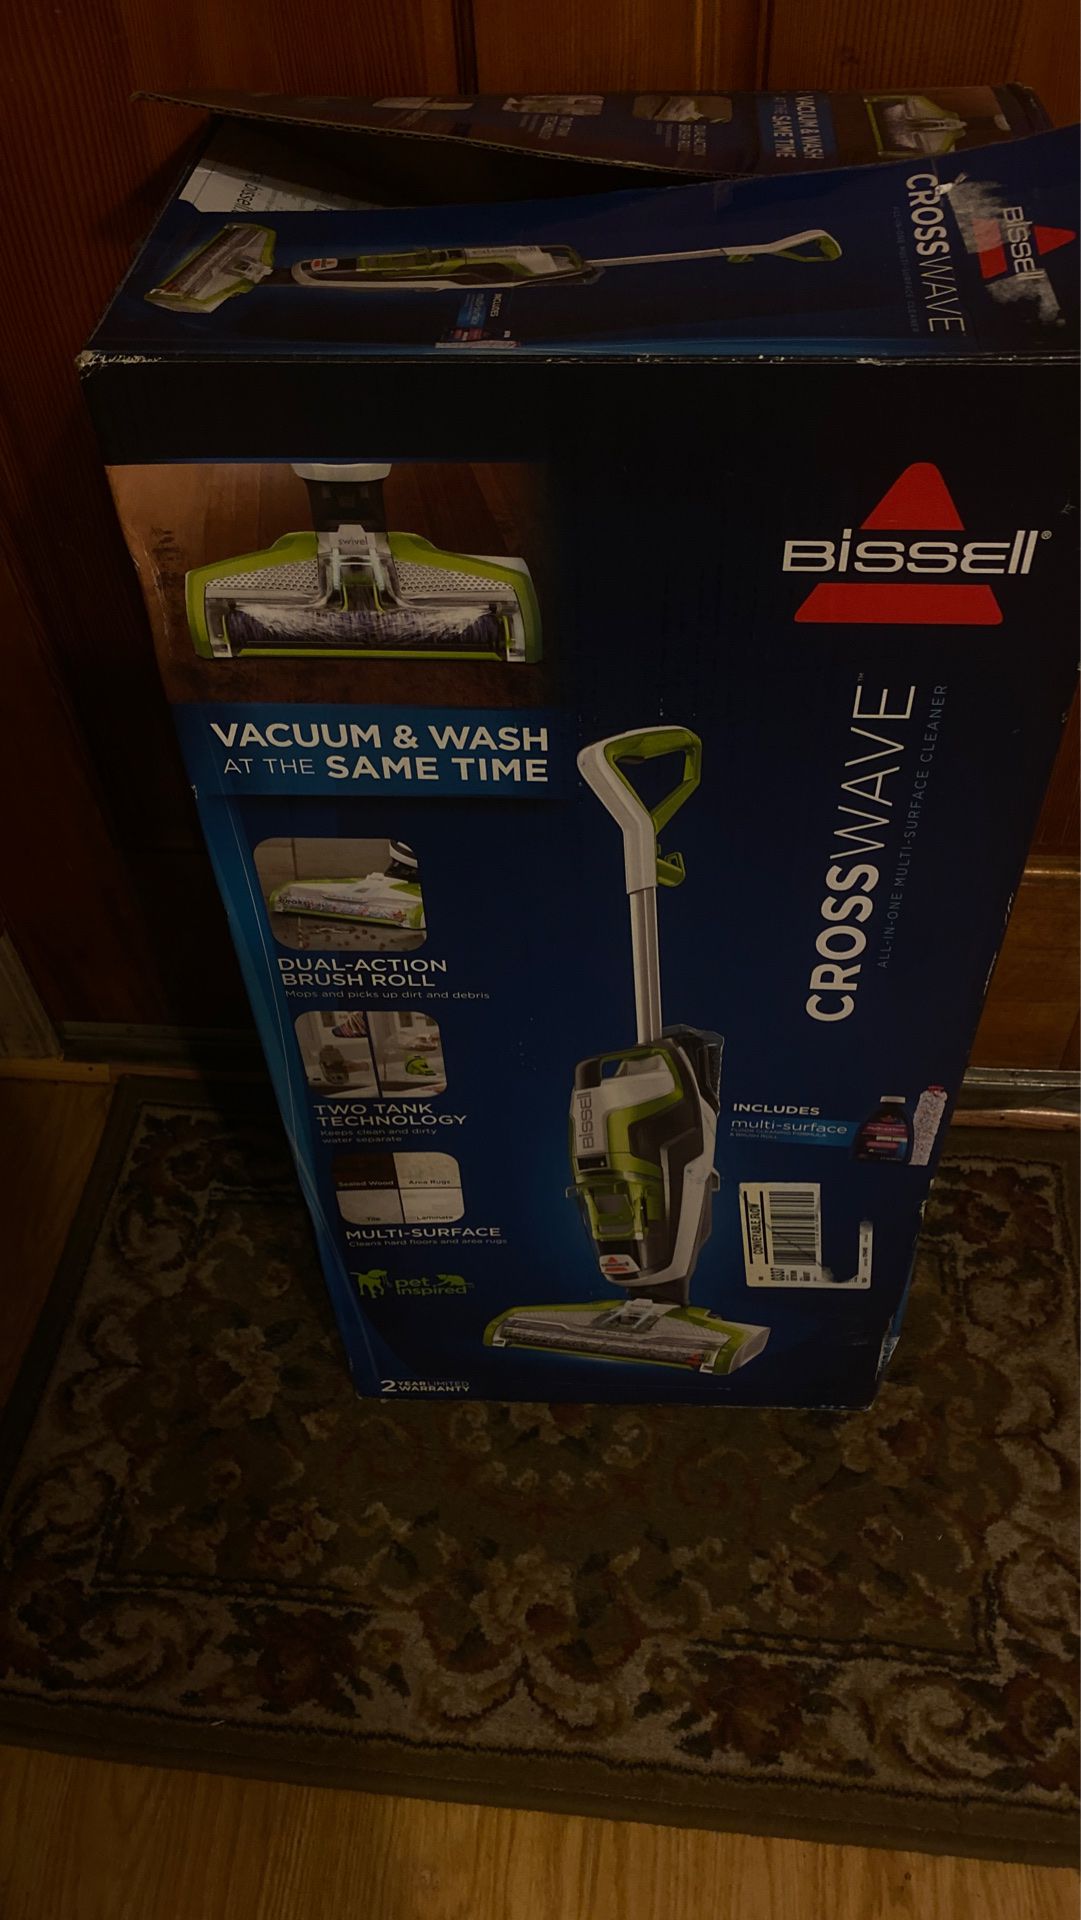 Steam mop with vacuum